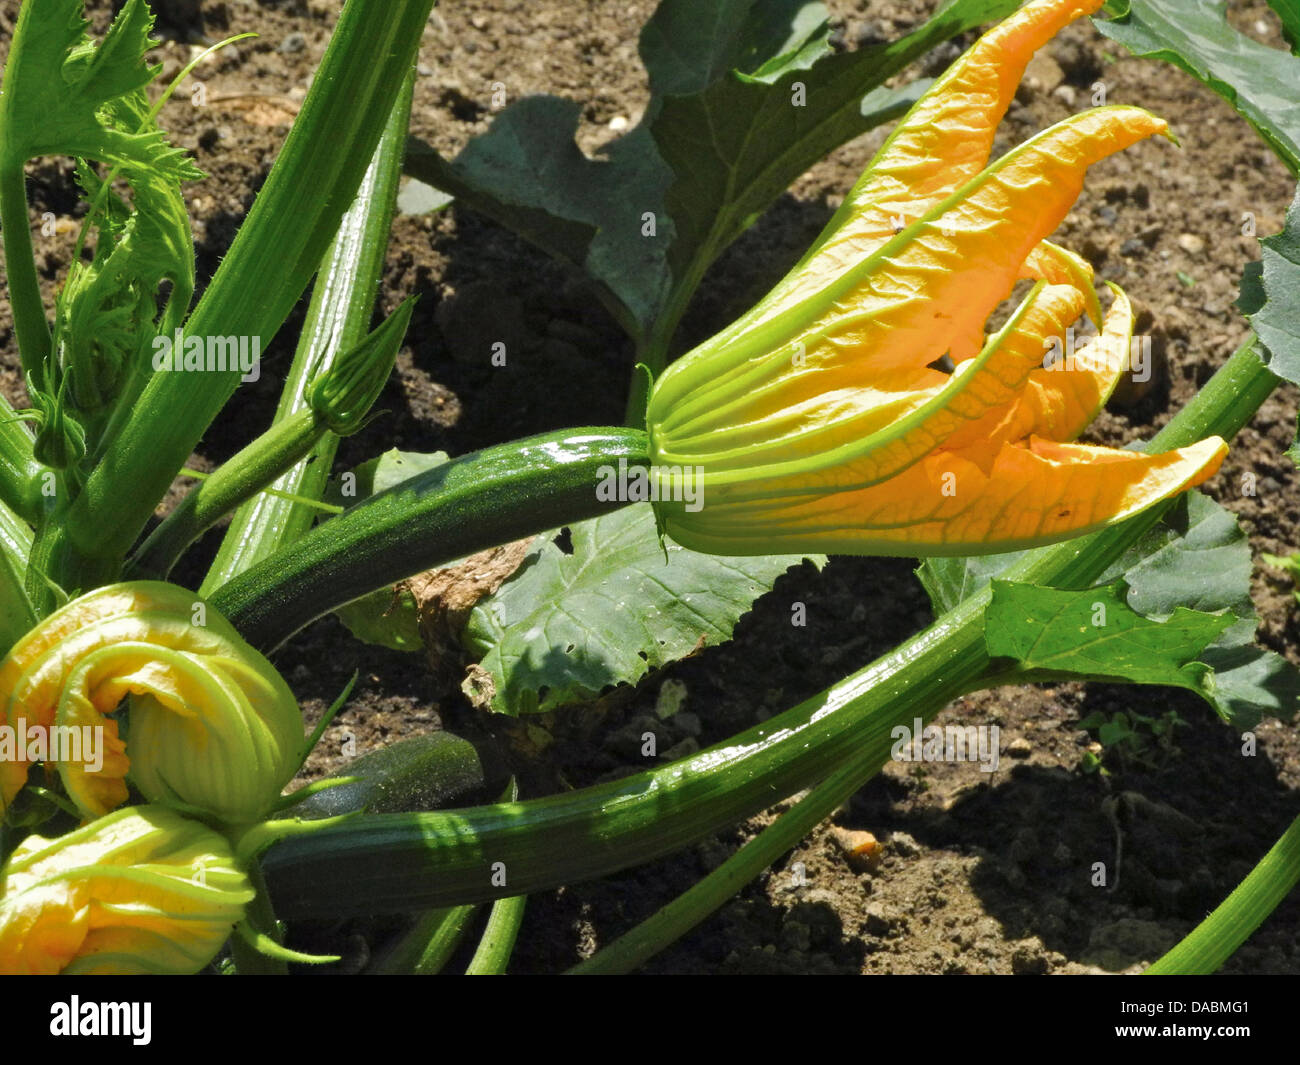 Courgette flowers growing on plant in a garden Stock Photo